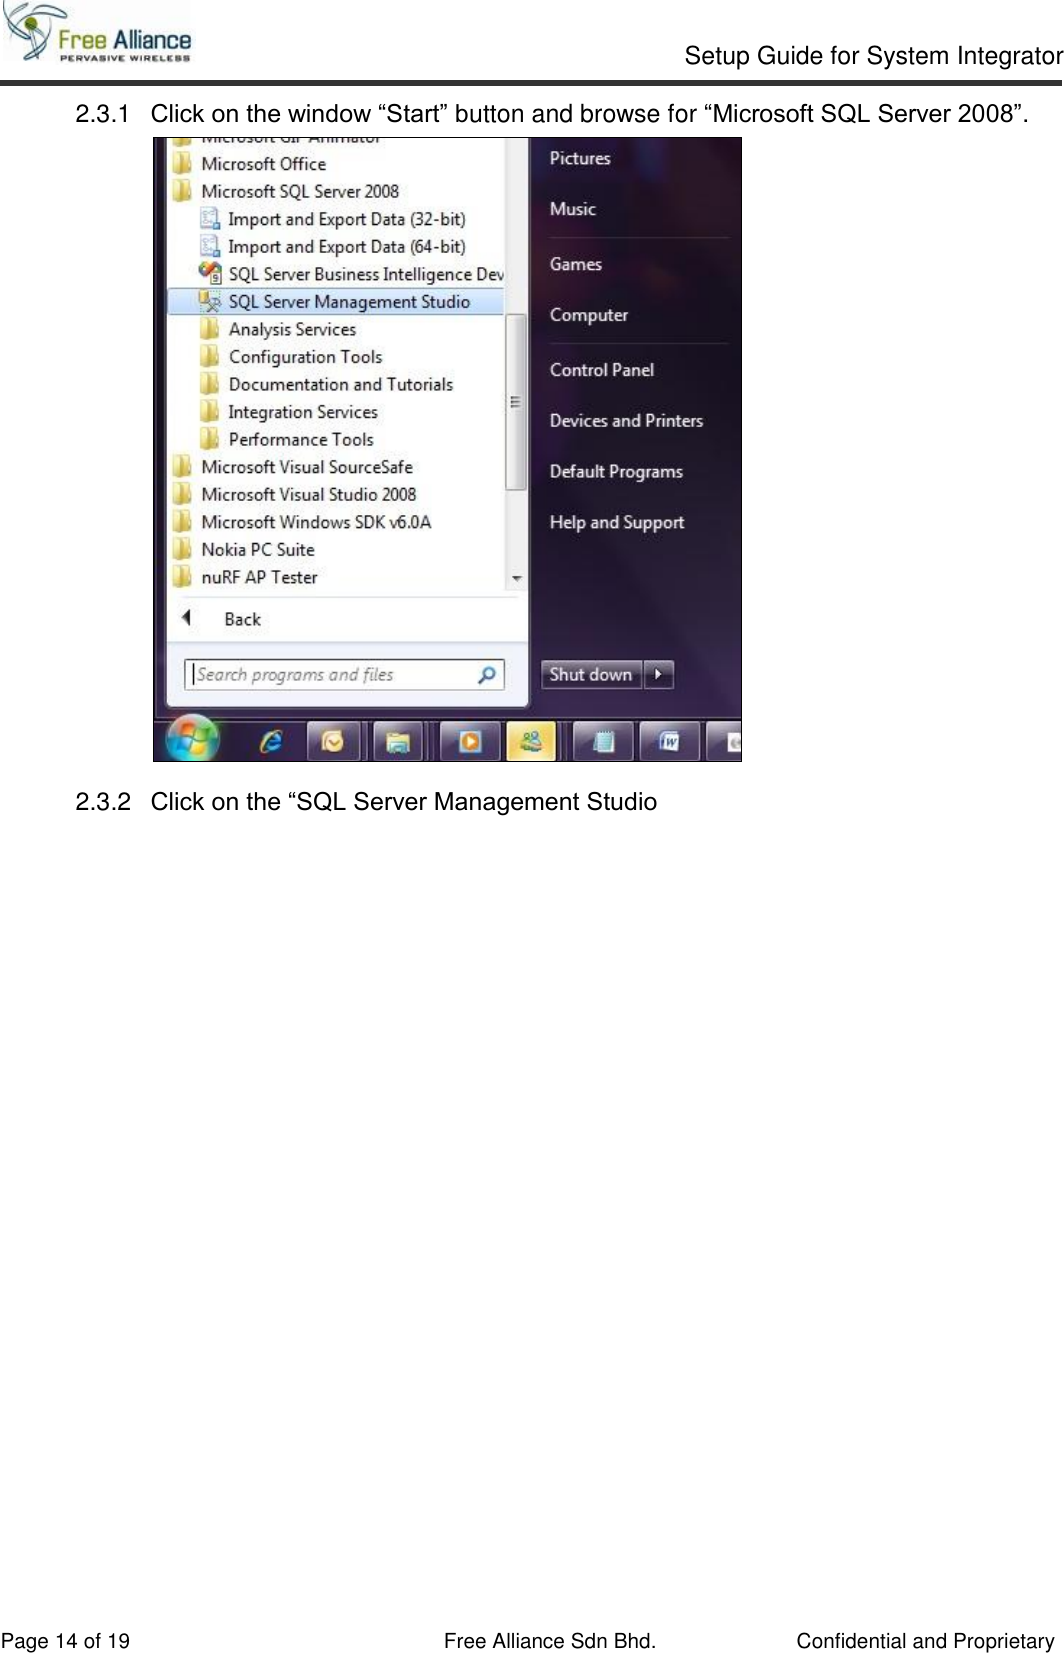     Setup Guide for System Integrator                                                                                                   Page 14 of 19 Free Alliance Sdn Bhd.             Confidential and Proprietary 2.3.1  Click on the window “Start” button and browse for “Microsoft SQL Server 2008”.  2.3.2  Click on the “SQL Server Management Studio  